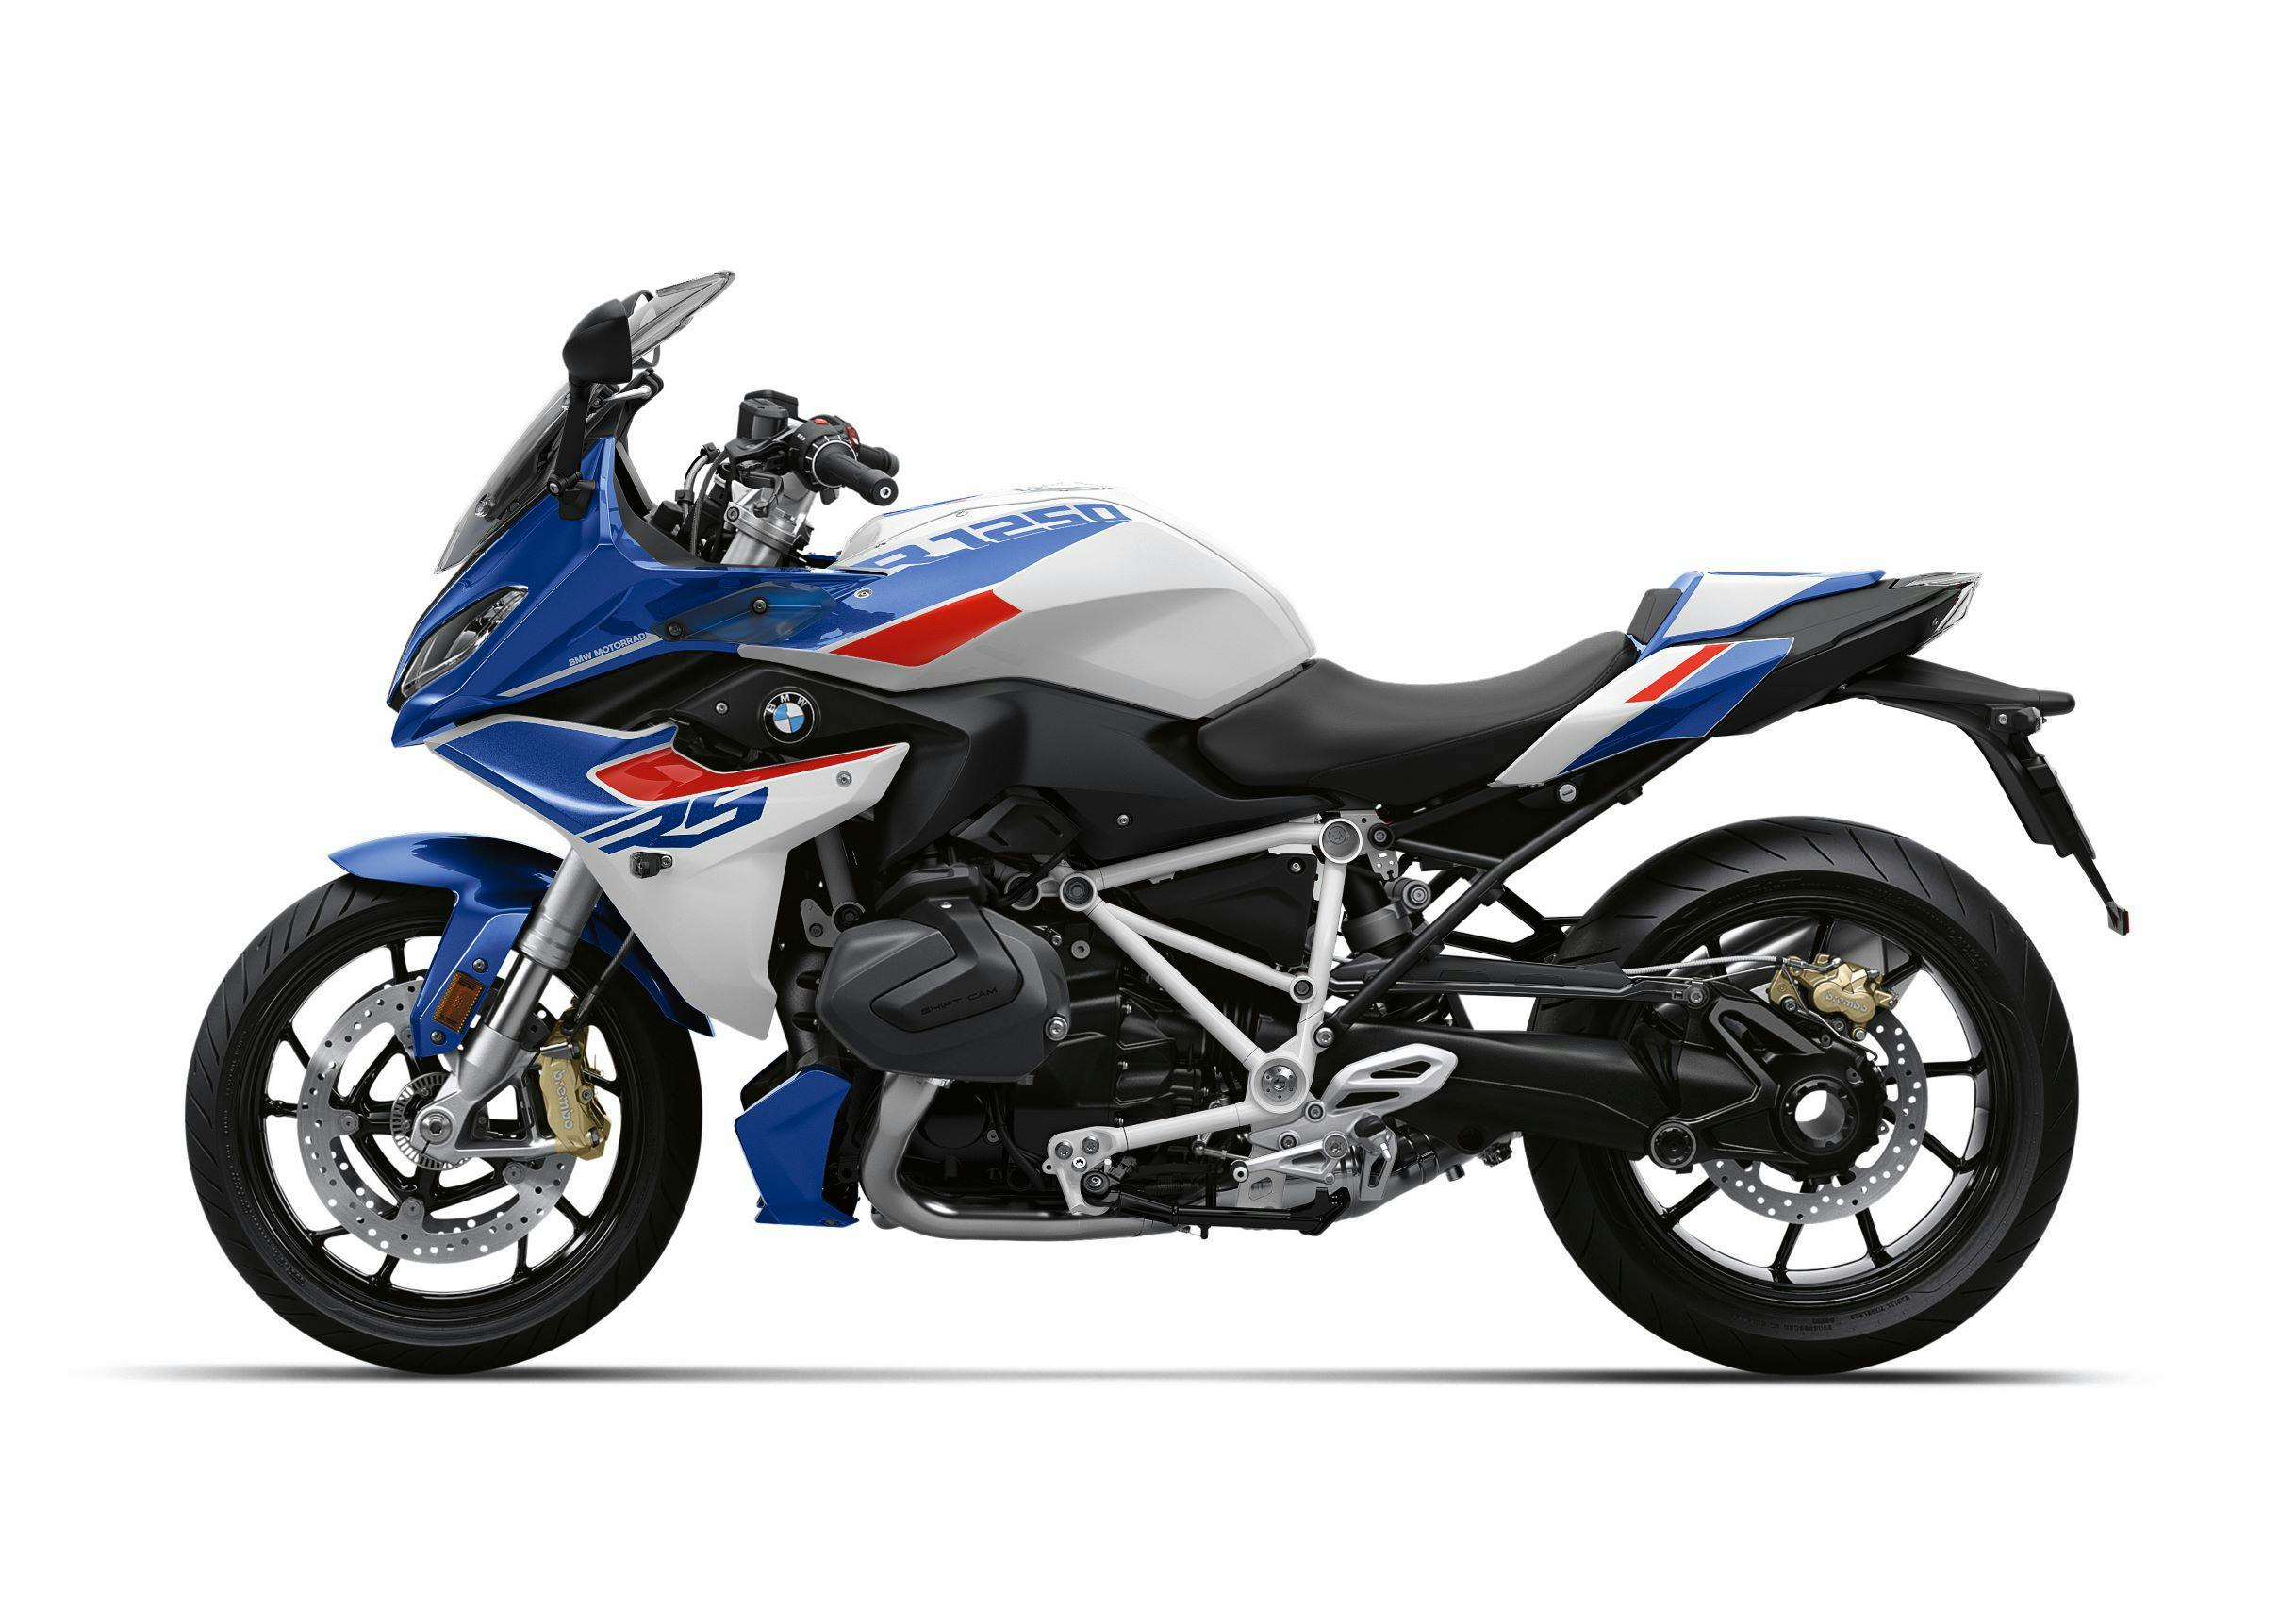 BMW R 1250 RS Sport in light white / racing blue metallic / racing red colour